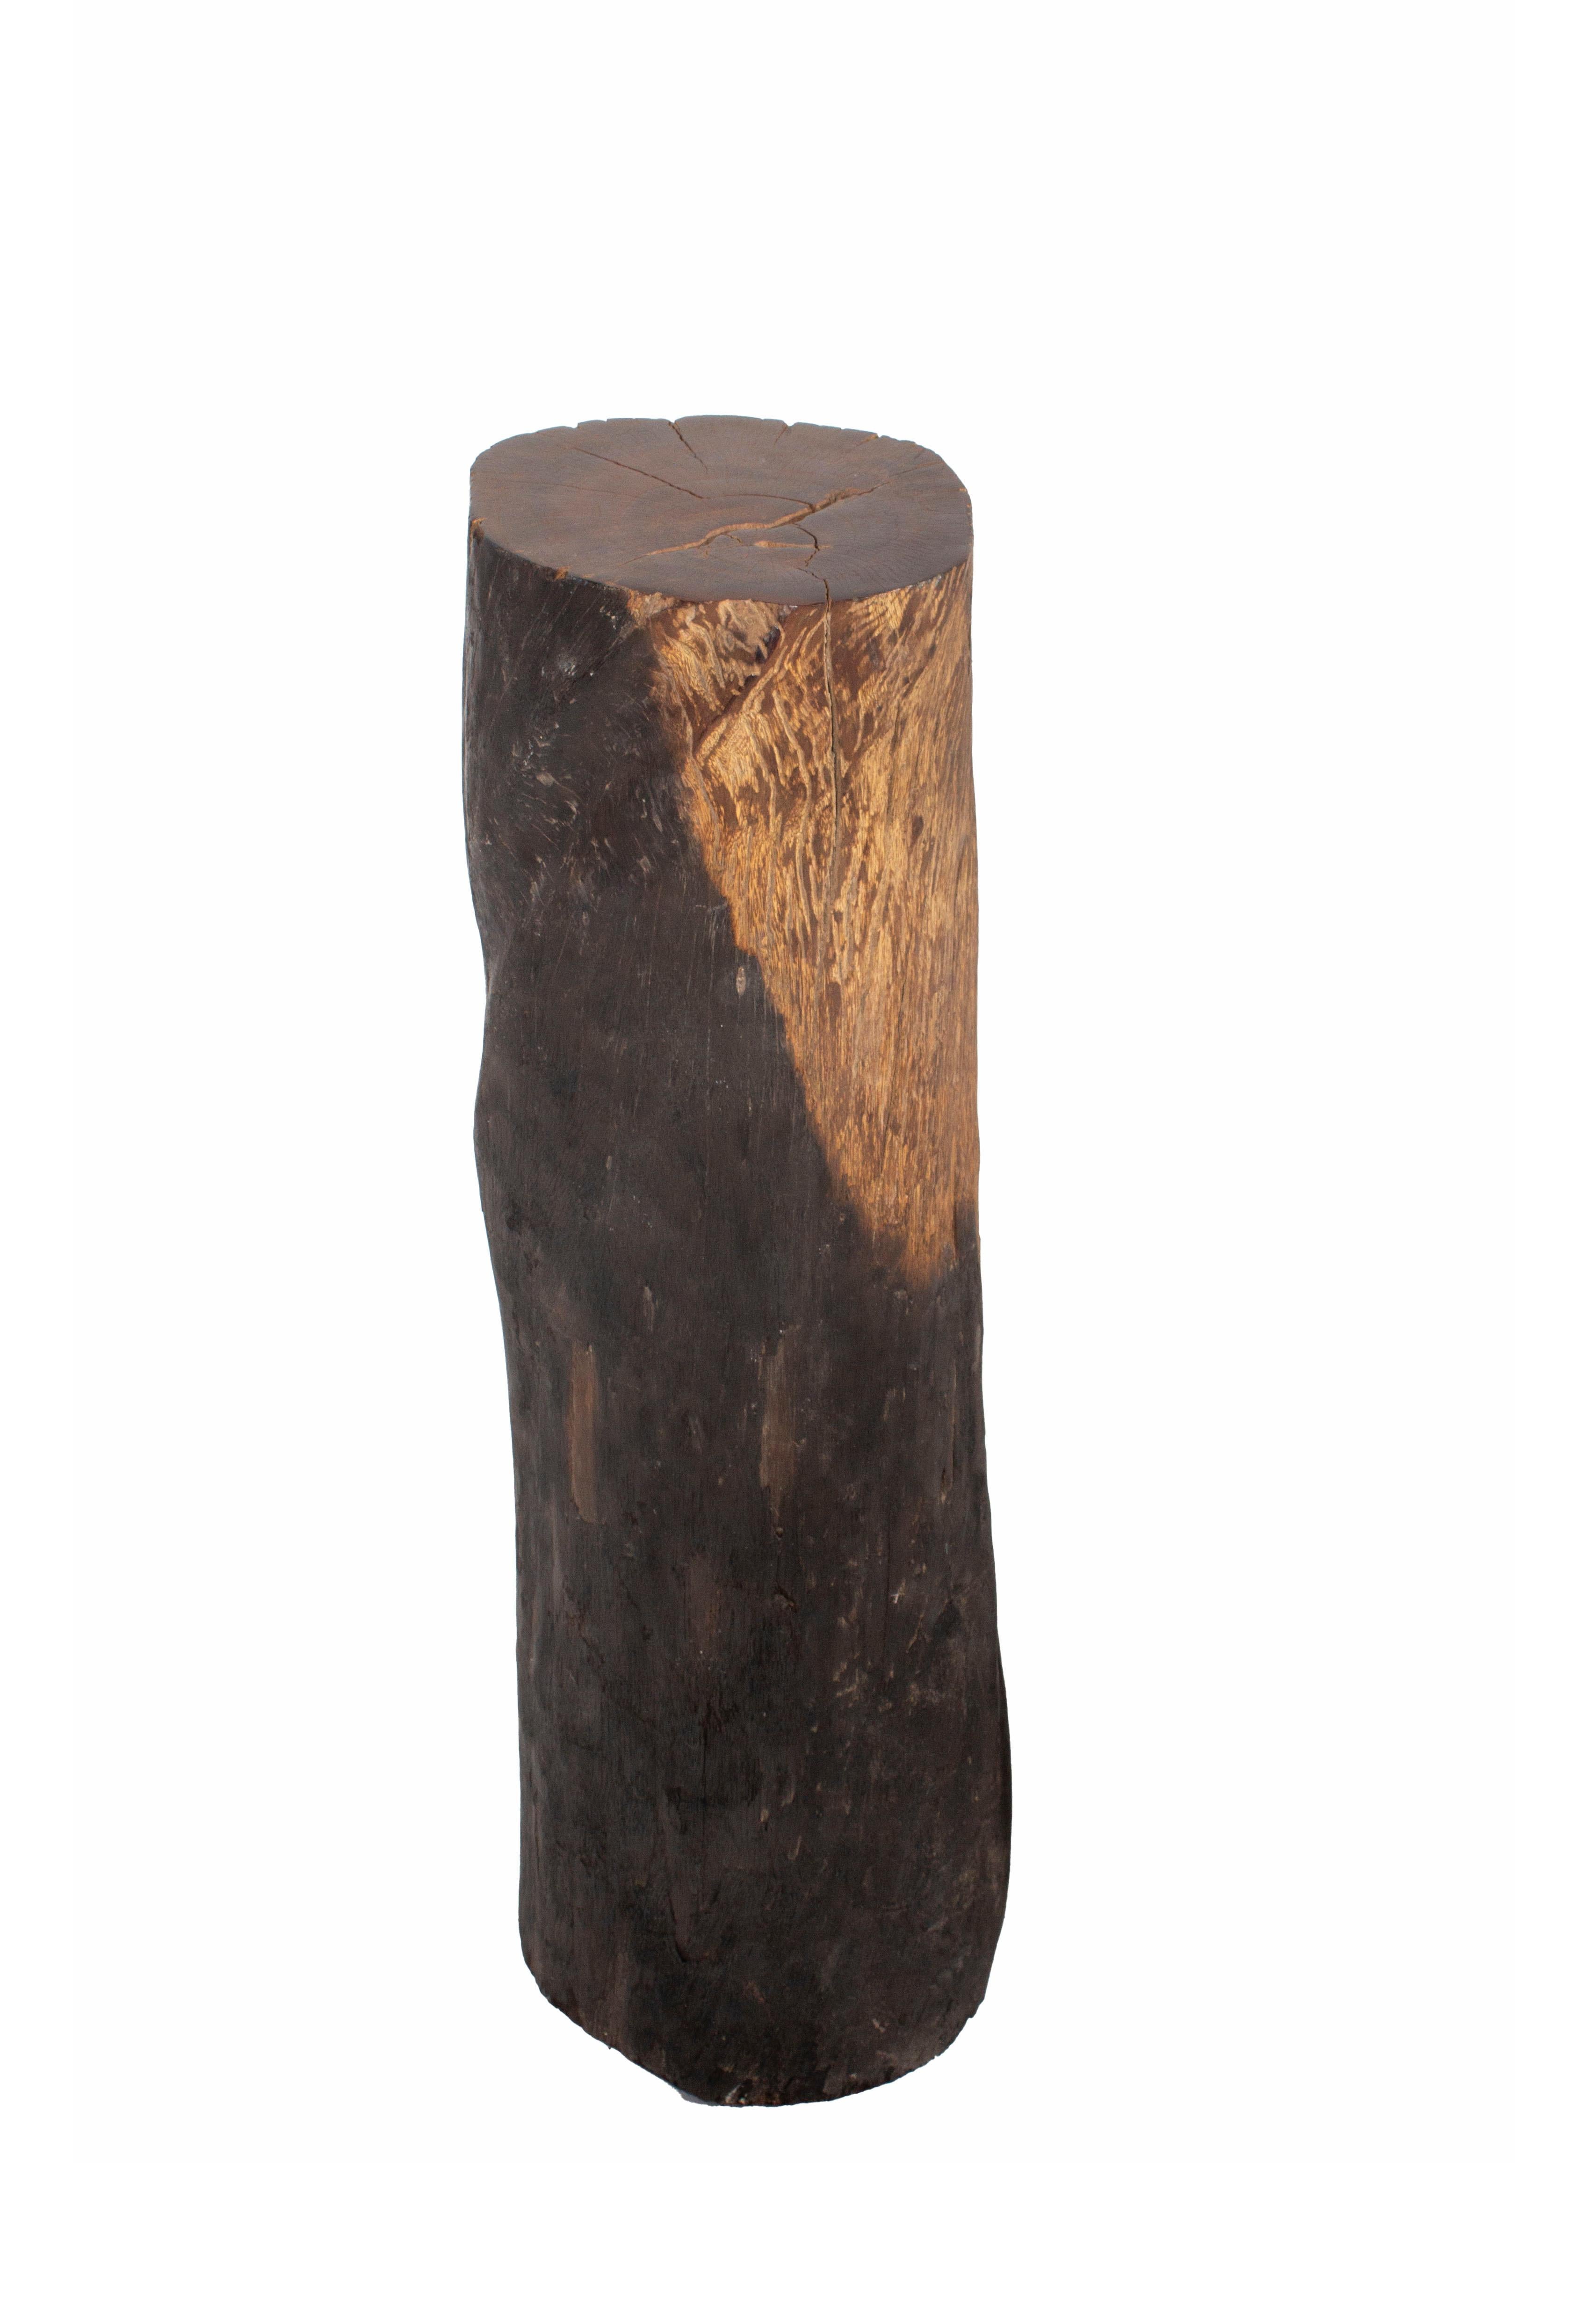 Wood Stump side table

Organic lychee wood.

In my organic, contemporary, vintage and mid-century modern aesthetic.